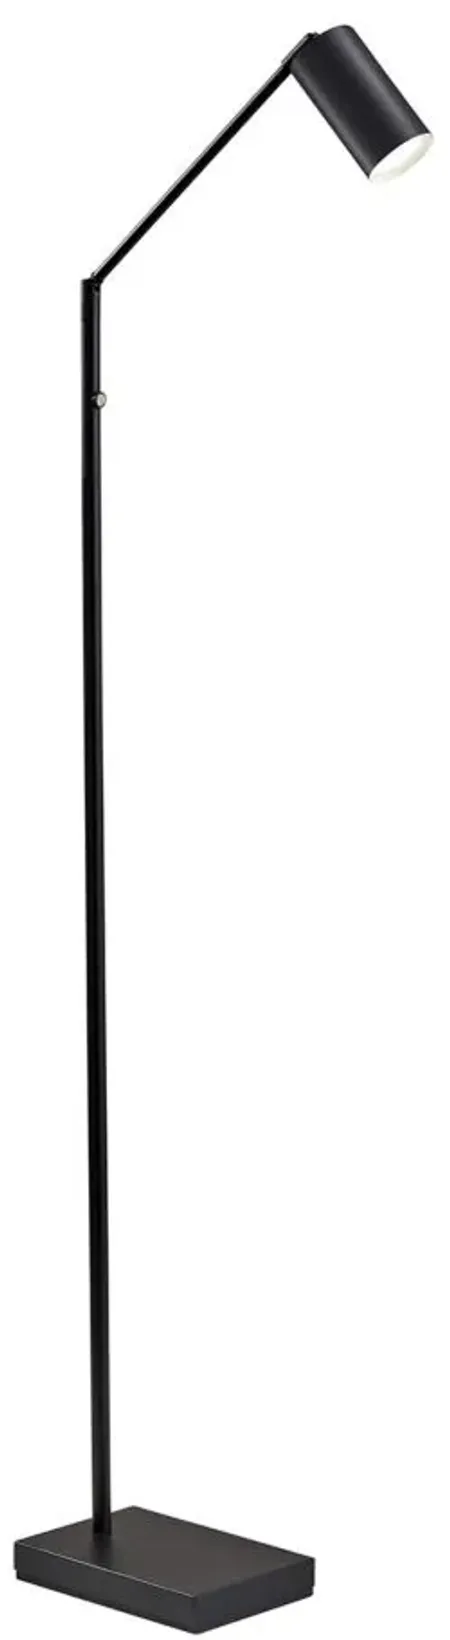 Colby LED Floor Lamp in Black by Adesso Inc